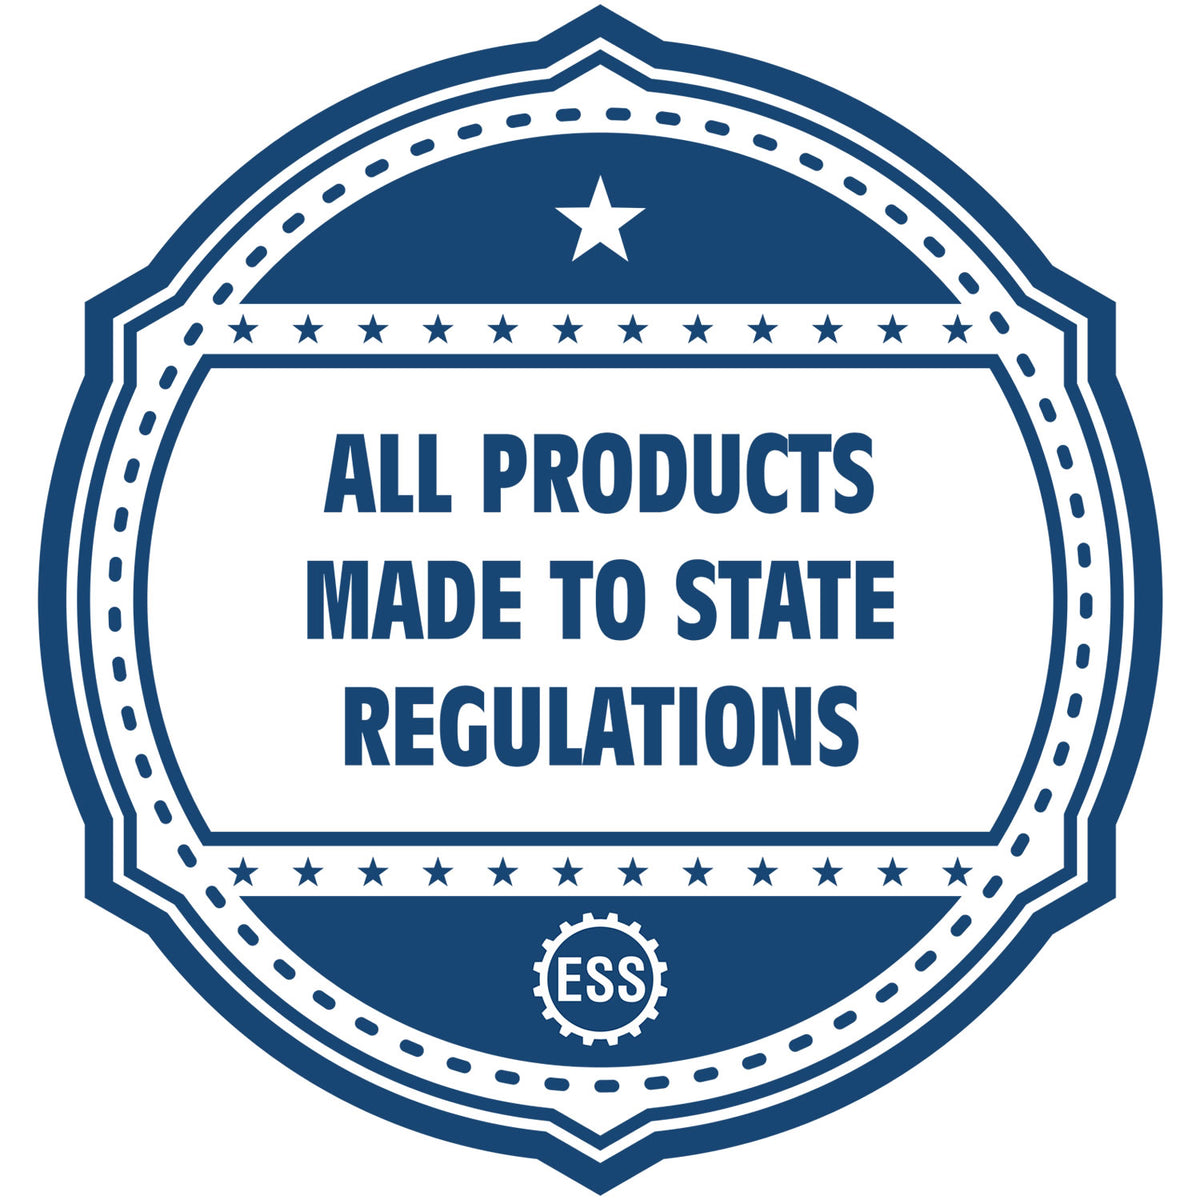 An icon or badge element for the Slim Pre-Inked West Virginia Landscape Architect Seal Stamp showing that this product is made in compliance with state regulations.